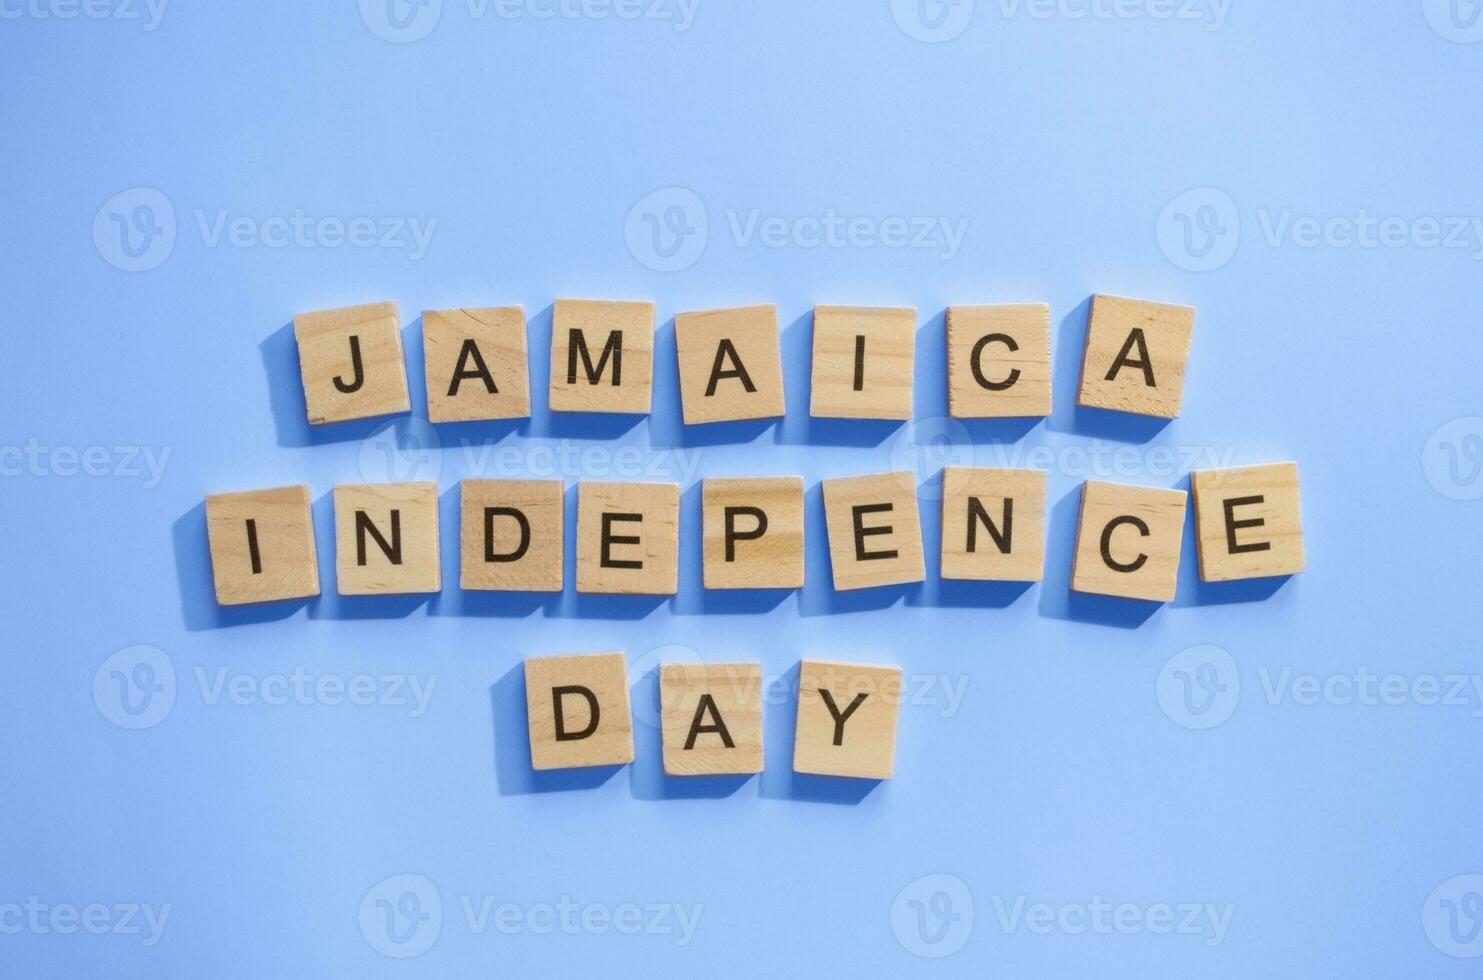 August 6, Jamaica Independence Day, flag of Jamaica, minimalistic banner with wooden letters photo